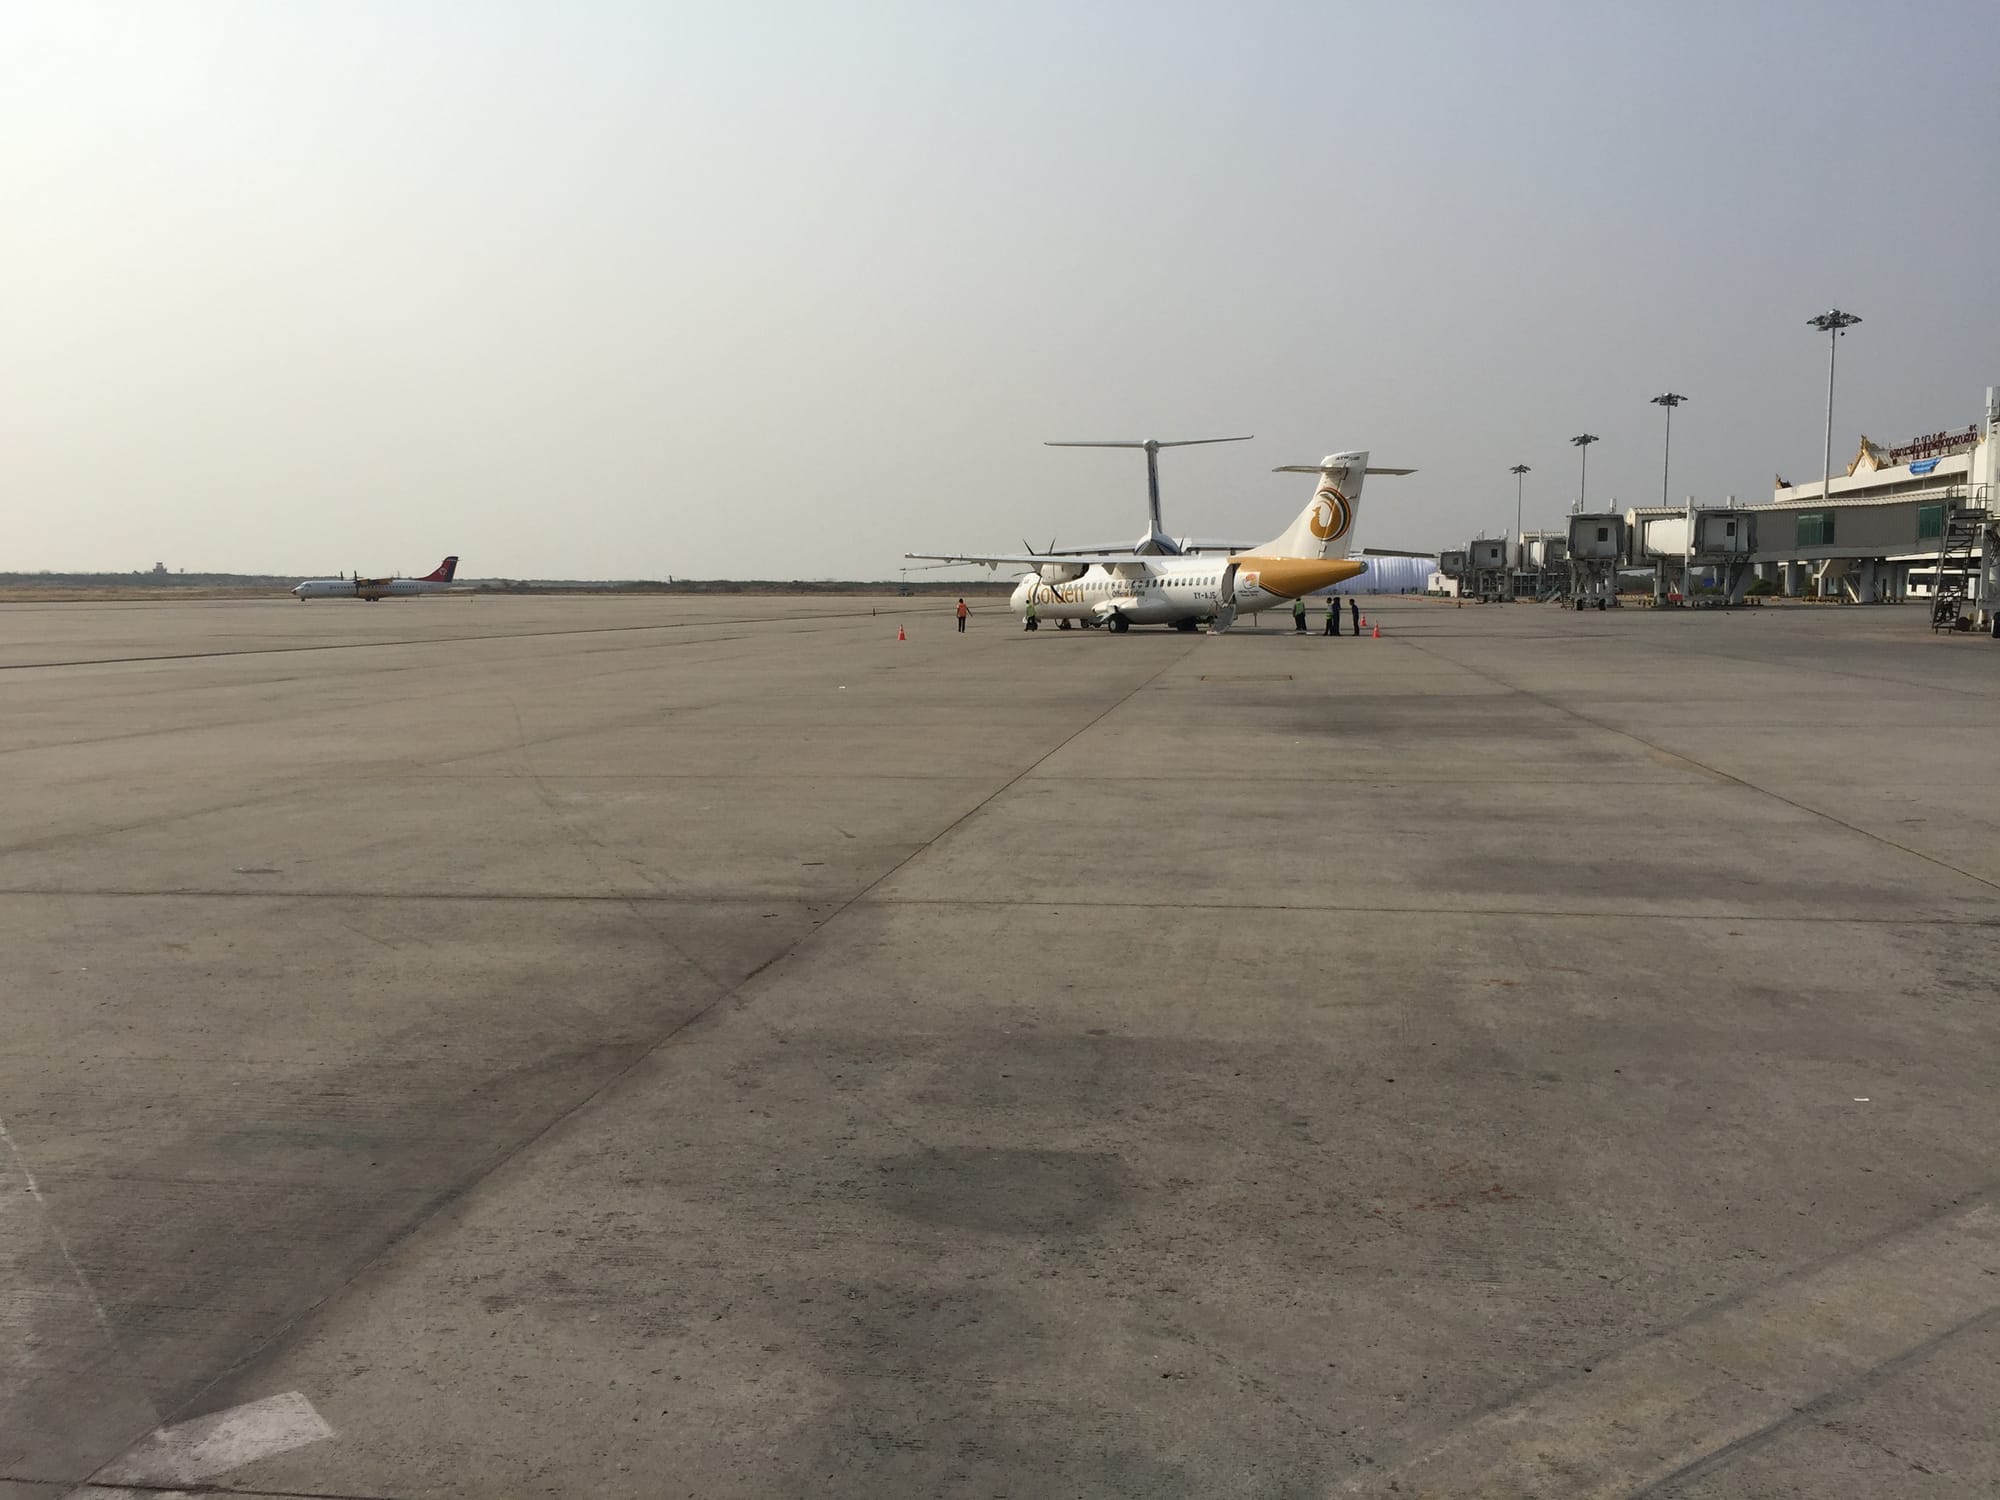 Photo by Author — on the tarmac at Mandalay International Airport (MDL)